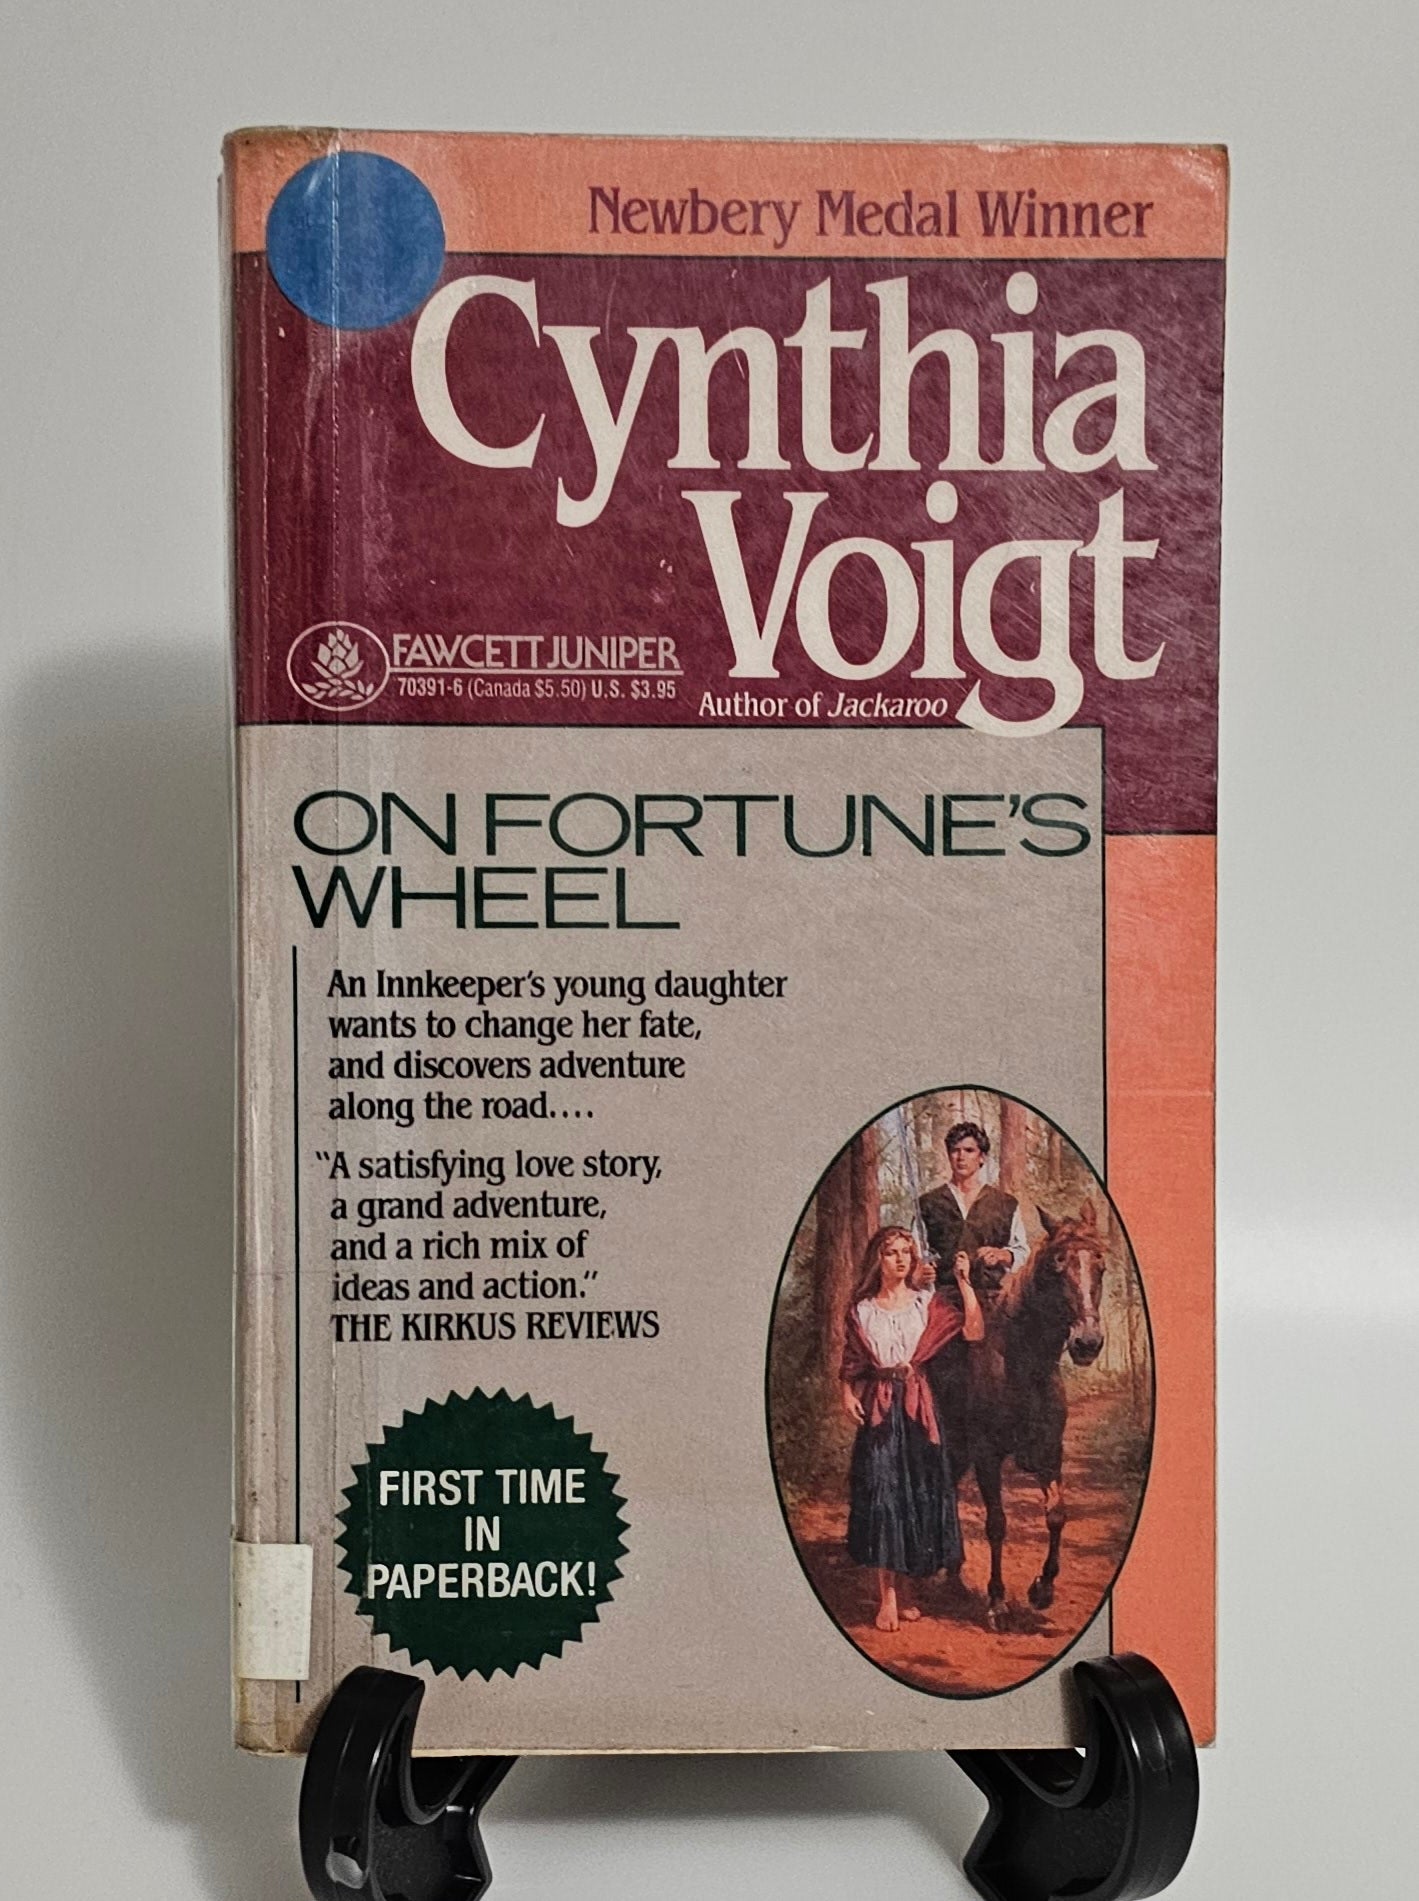 On Fortune's Wheel by Cynthia Voigt (Tales of the Kingdom Series #2)